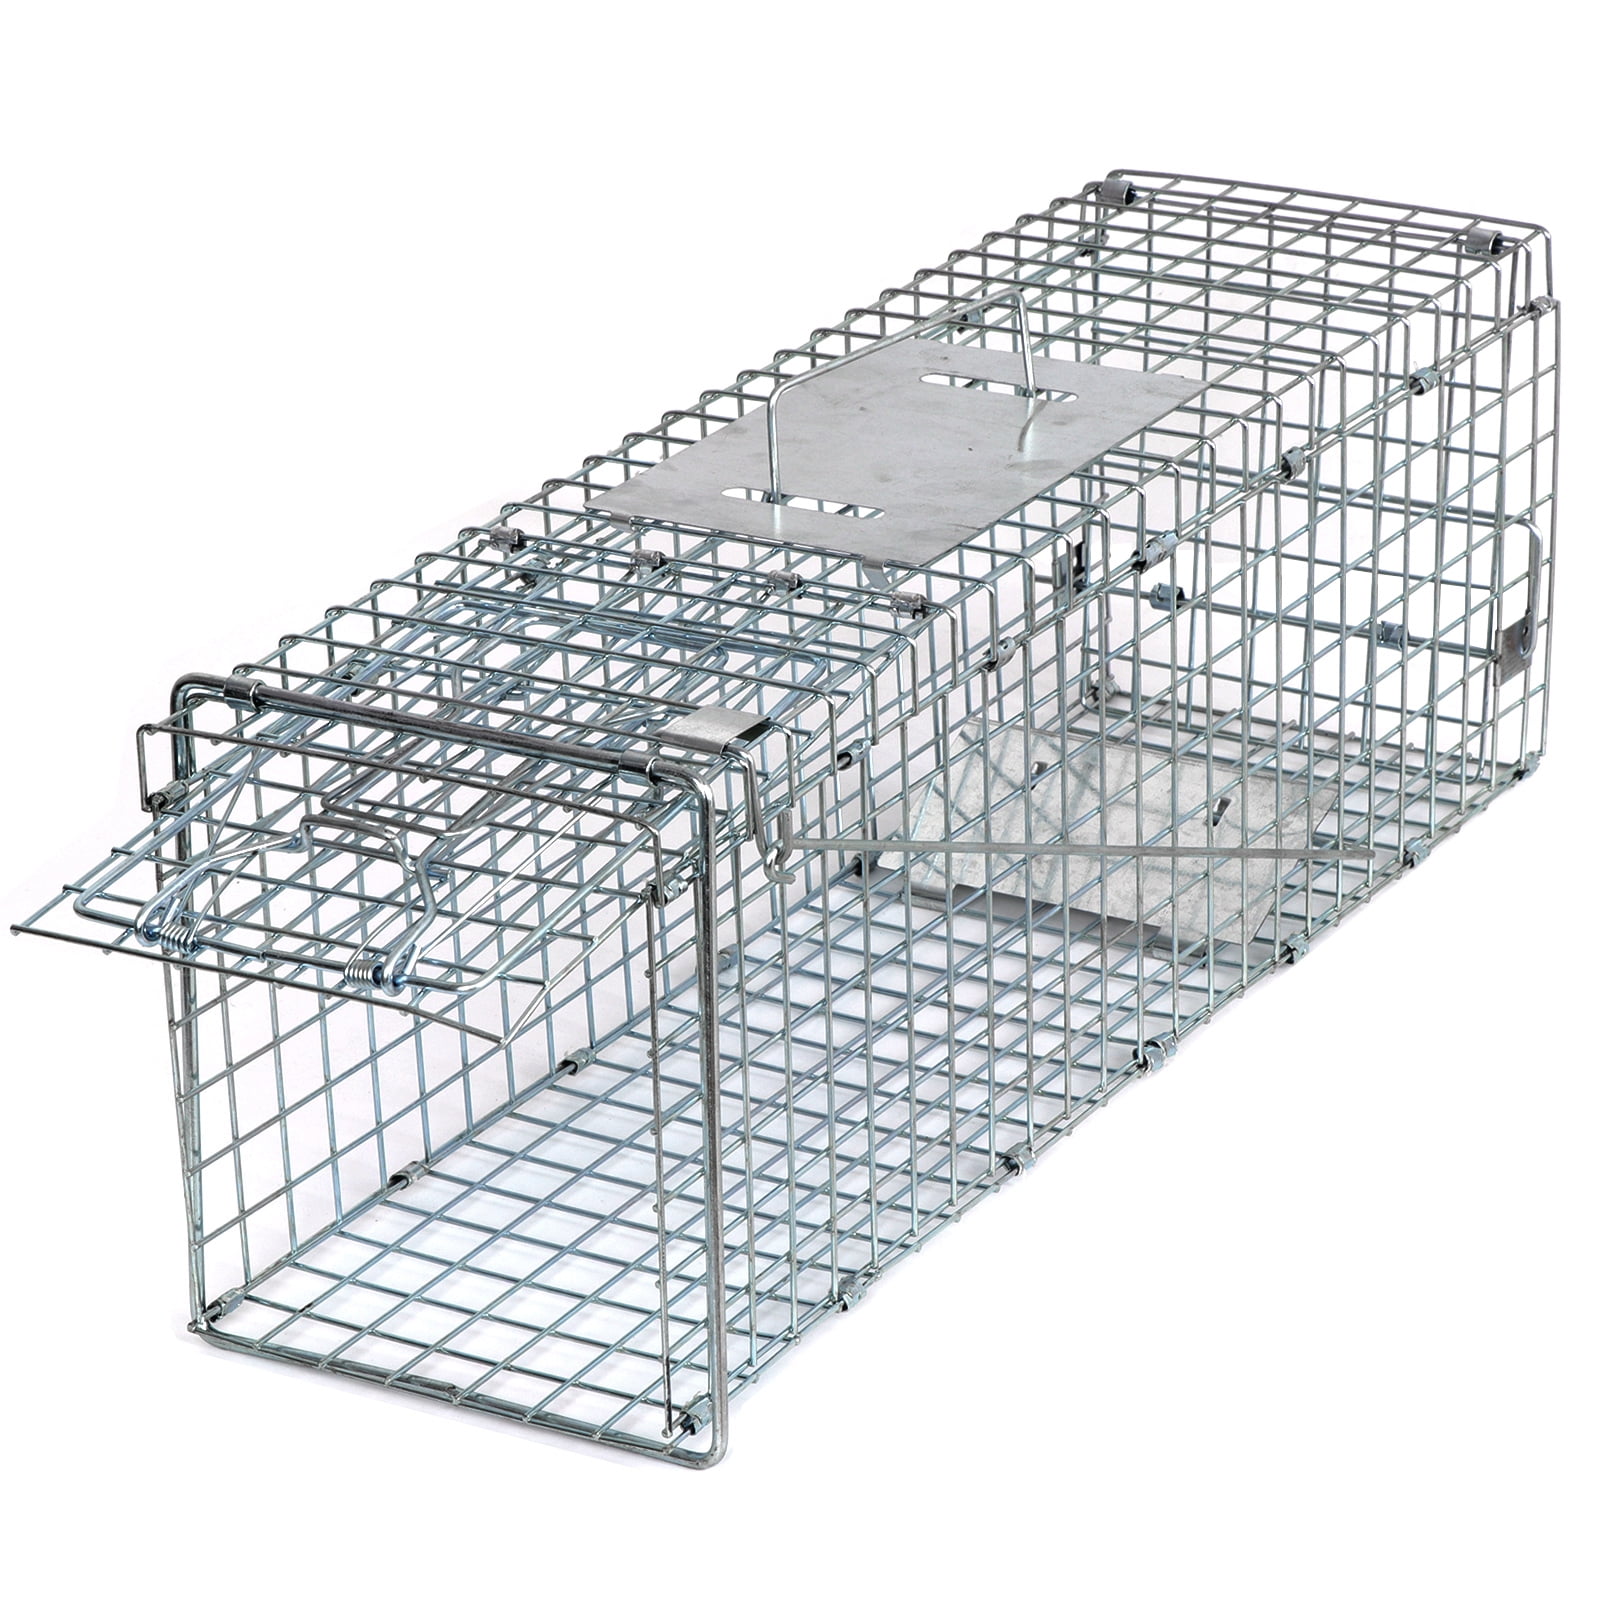 ZENY 32 inch Humane Live Animal Trap Cage for sale online 